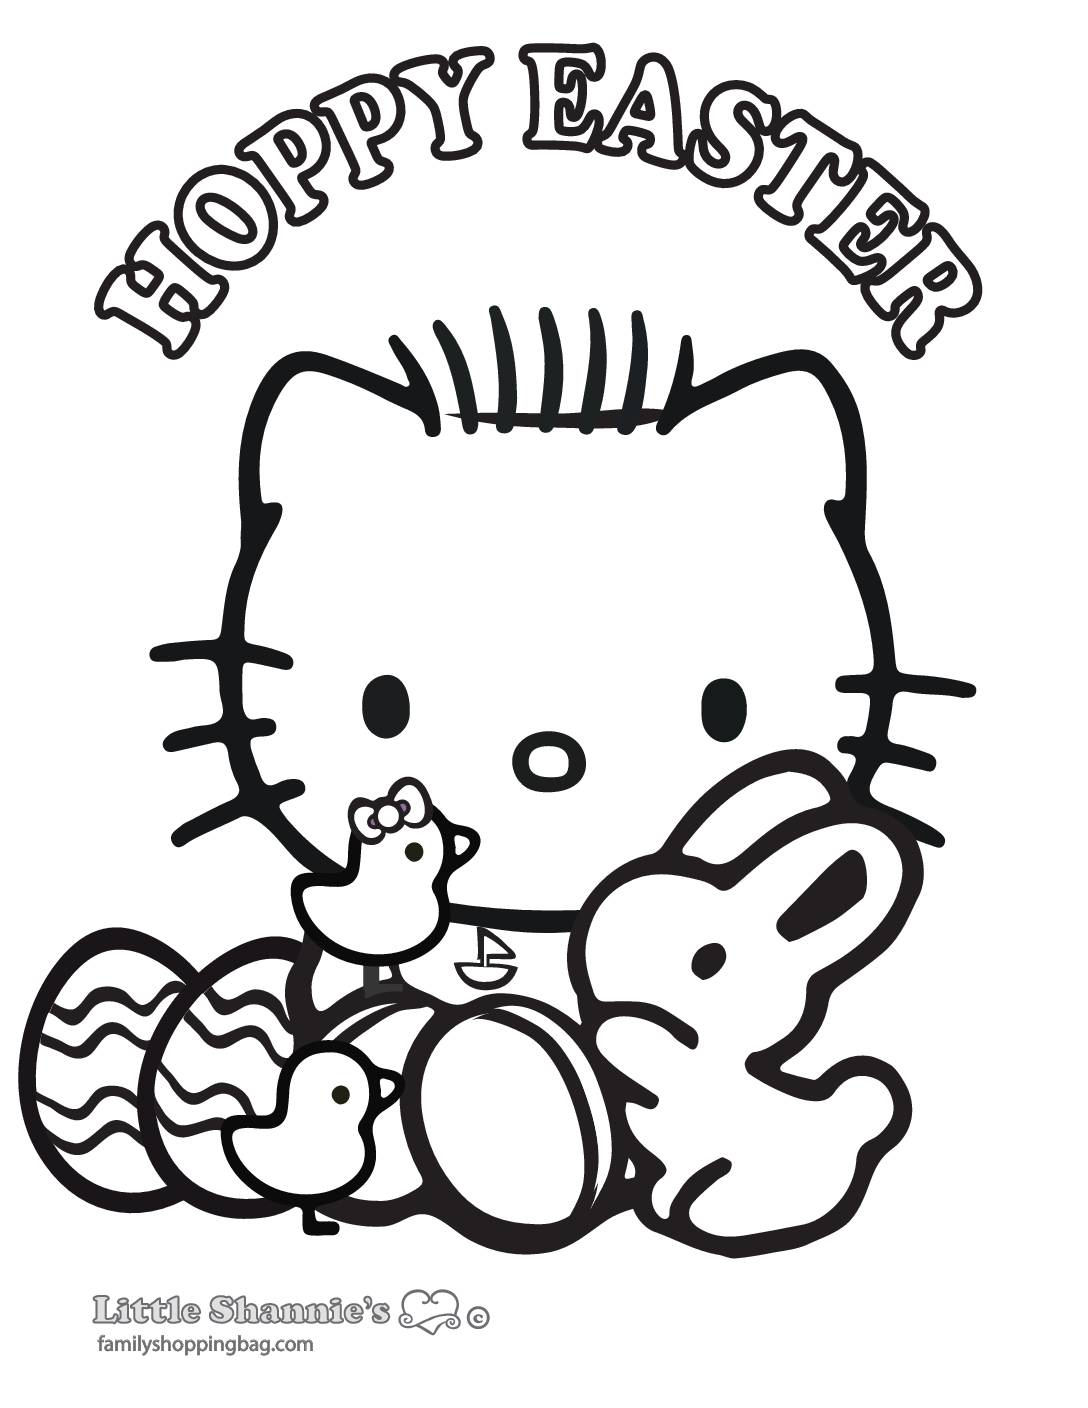 Coloring Page 3 Easter Coloring Pages